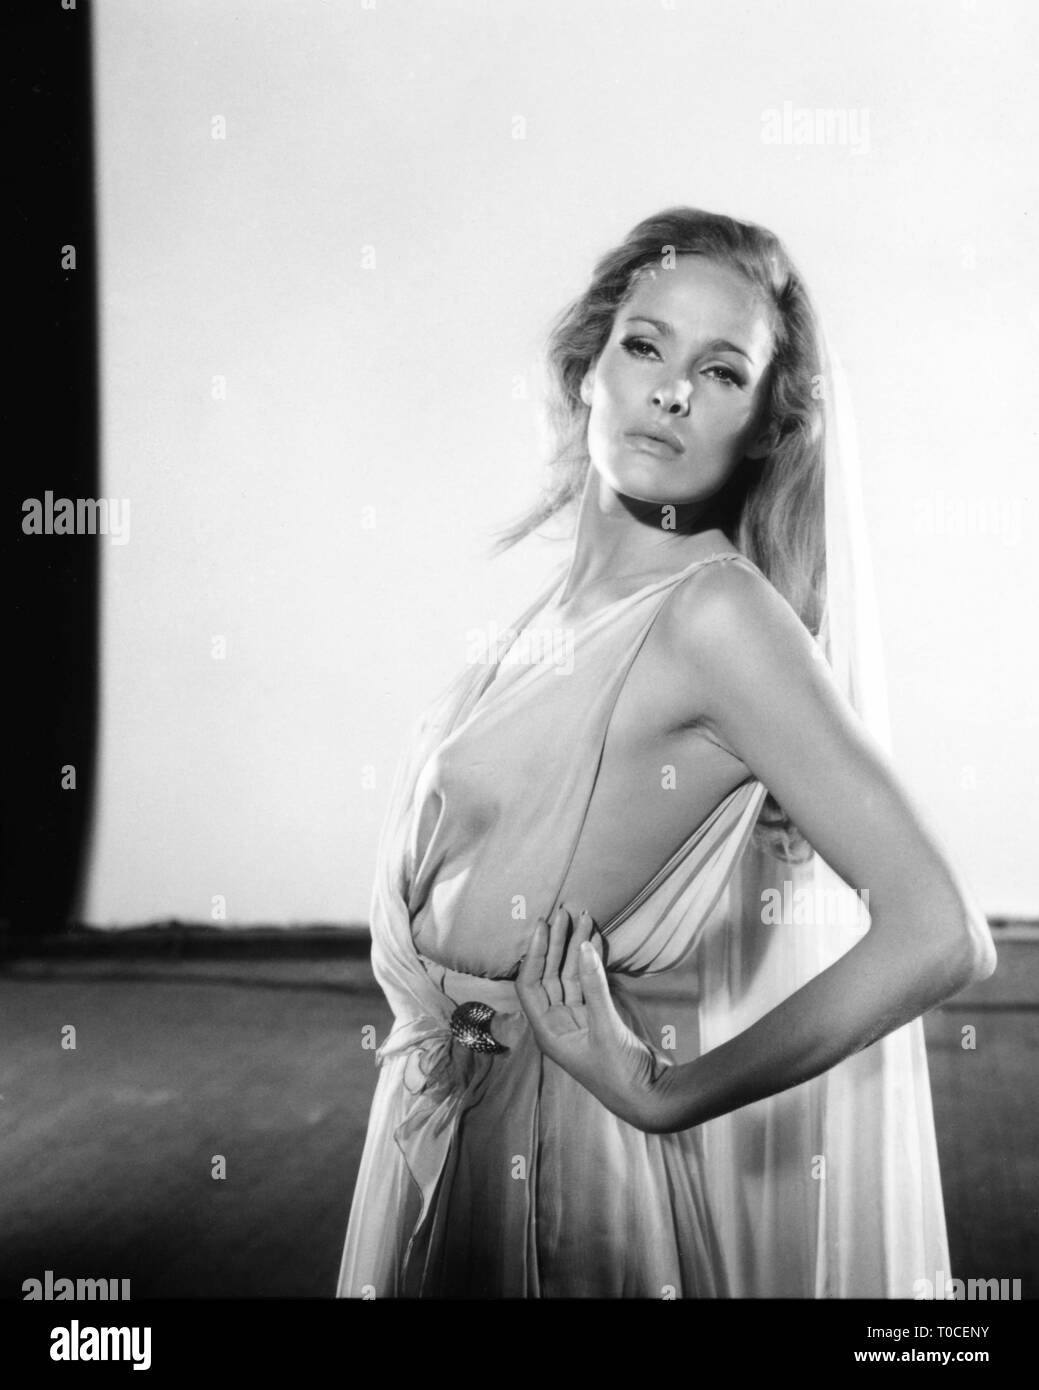 Ursula Andress as Ayesha SHE 1965 Portrait novel H. Rider Haggard Hammer Films / Associated British Picture Corporation ( ABPC ) Stock Photo